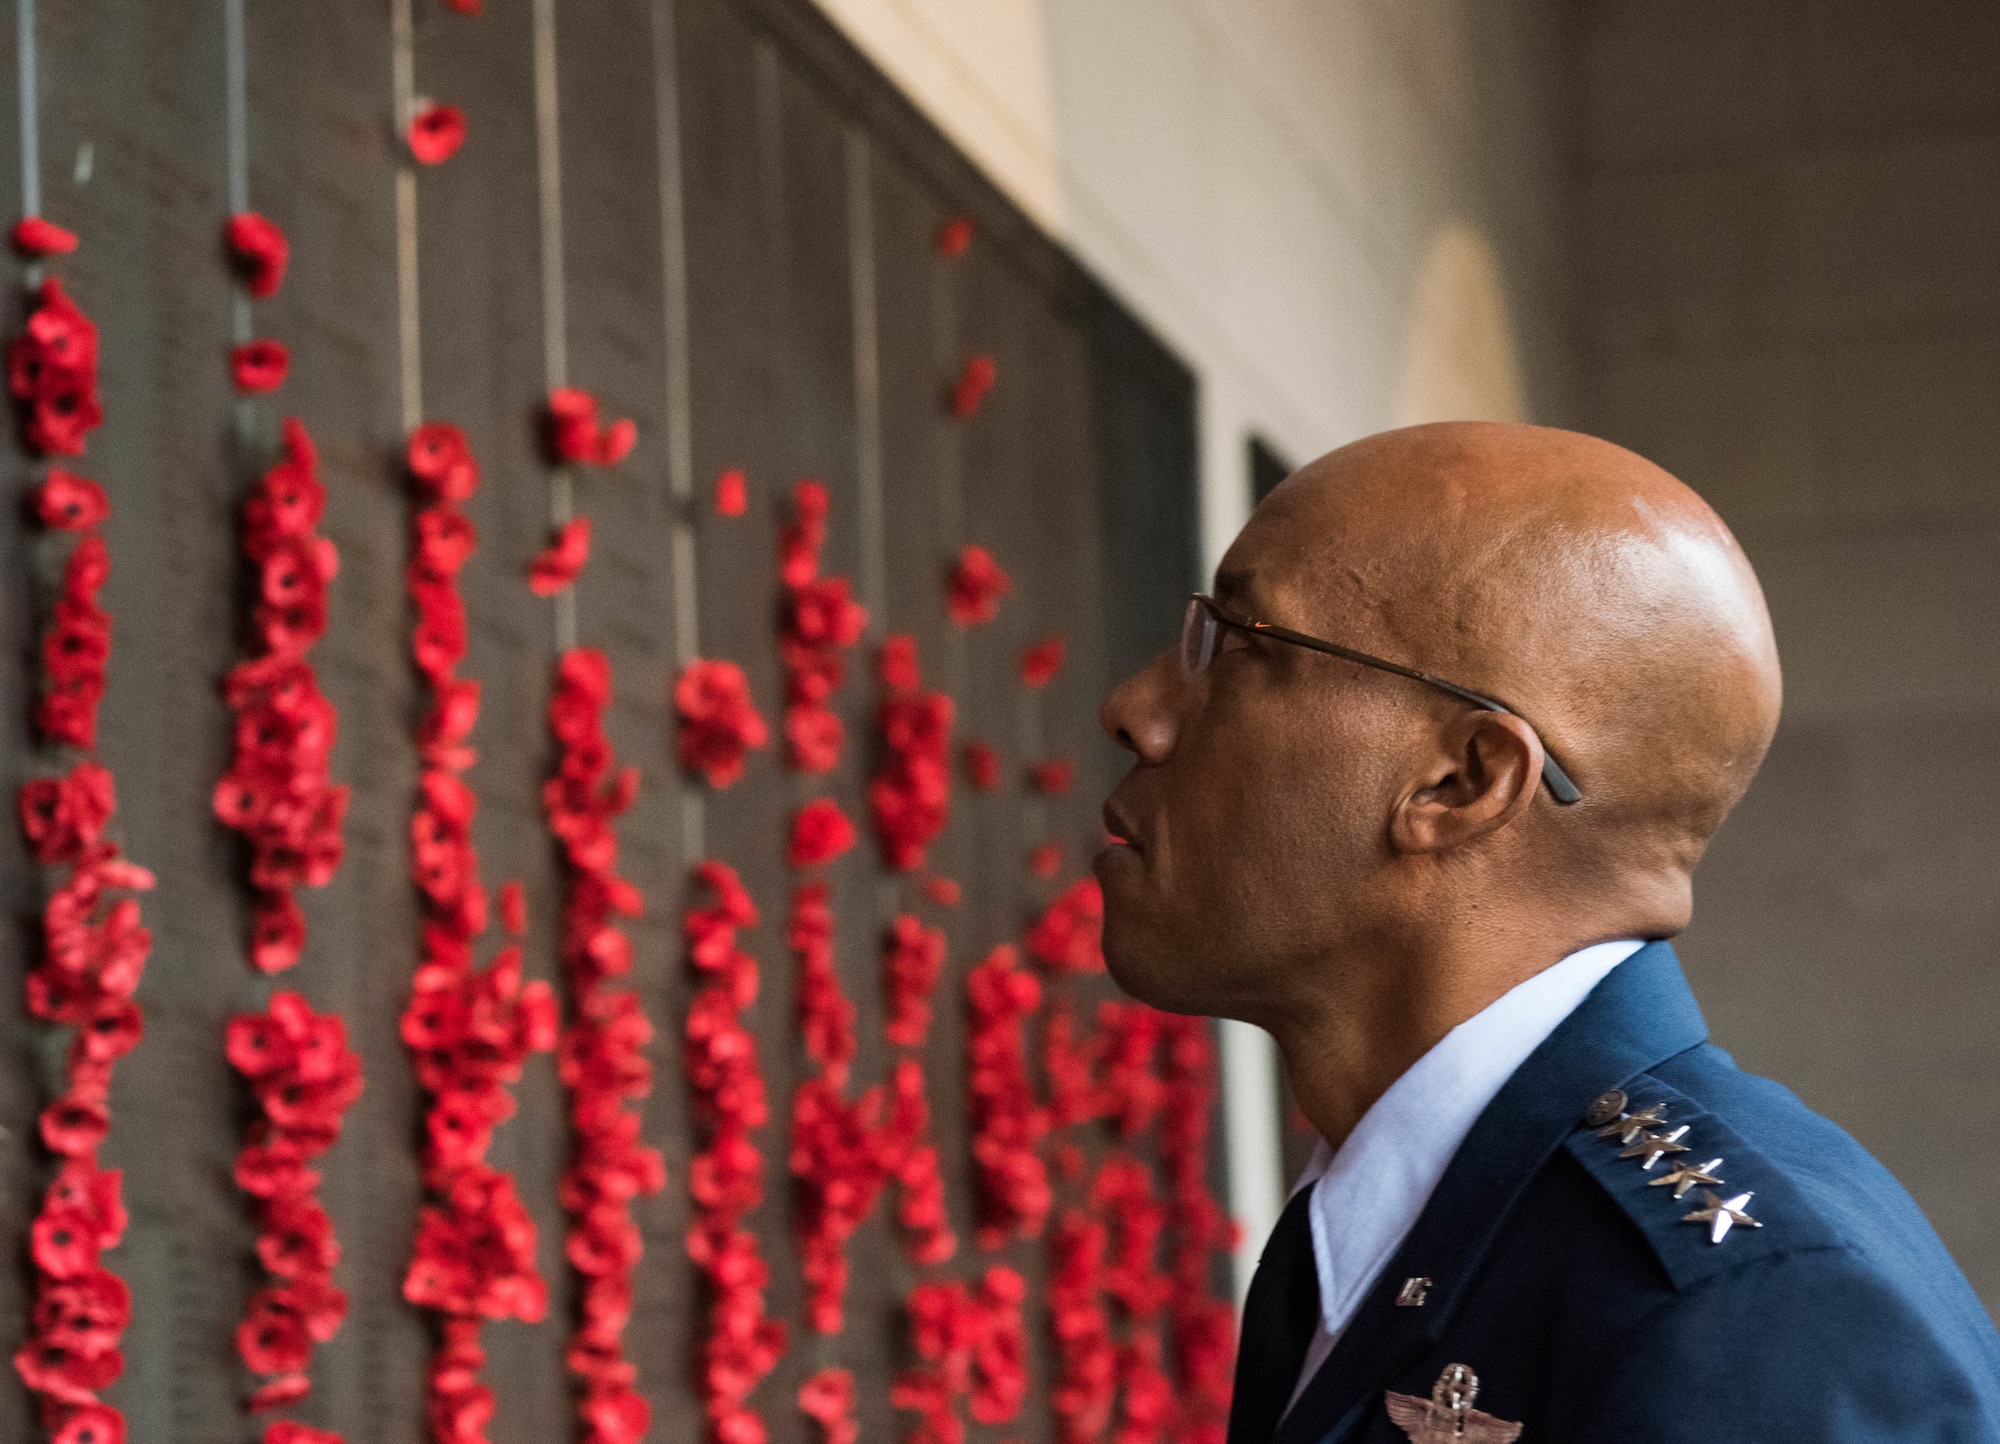 Gen. CQ Brown, Jr., Pacific Air Forces commander, walks around the Australia War Memorial before a “Last Post” ceremony in Canberra, Australia, Aug. 11, 2018. The ceremony was held to honor Pvt. Robert Young of the Australian Army, who fought in World War II and died March 21, 1944. (U.S. Air Force photo by Staff Sgt. Hailey Haux)